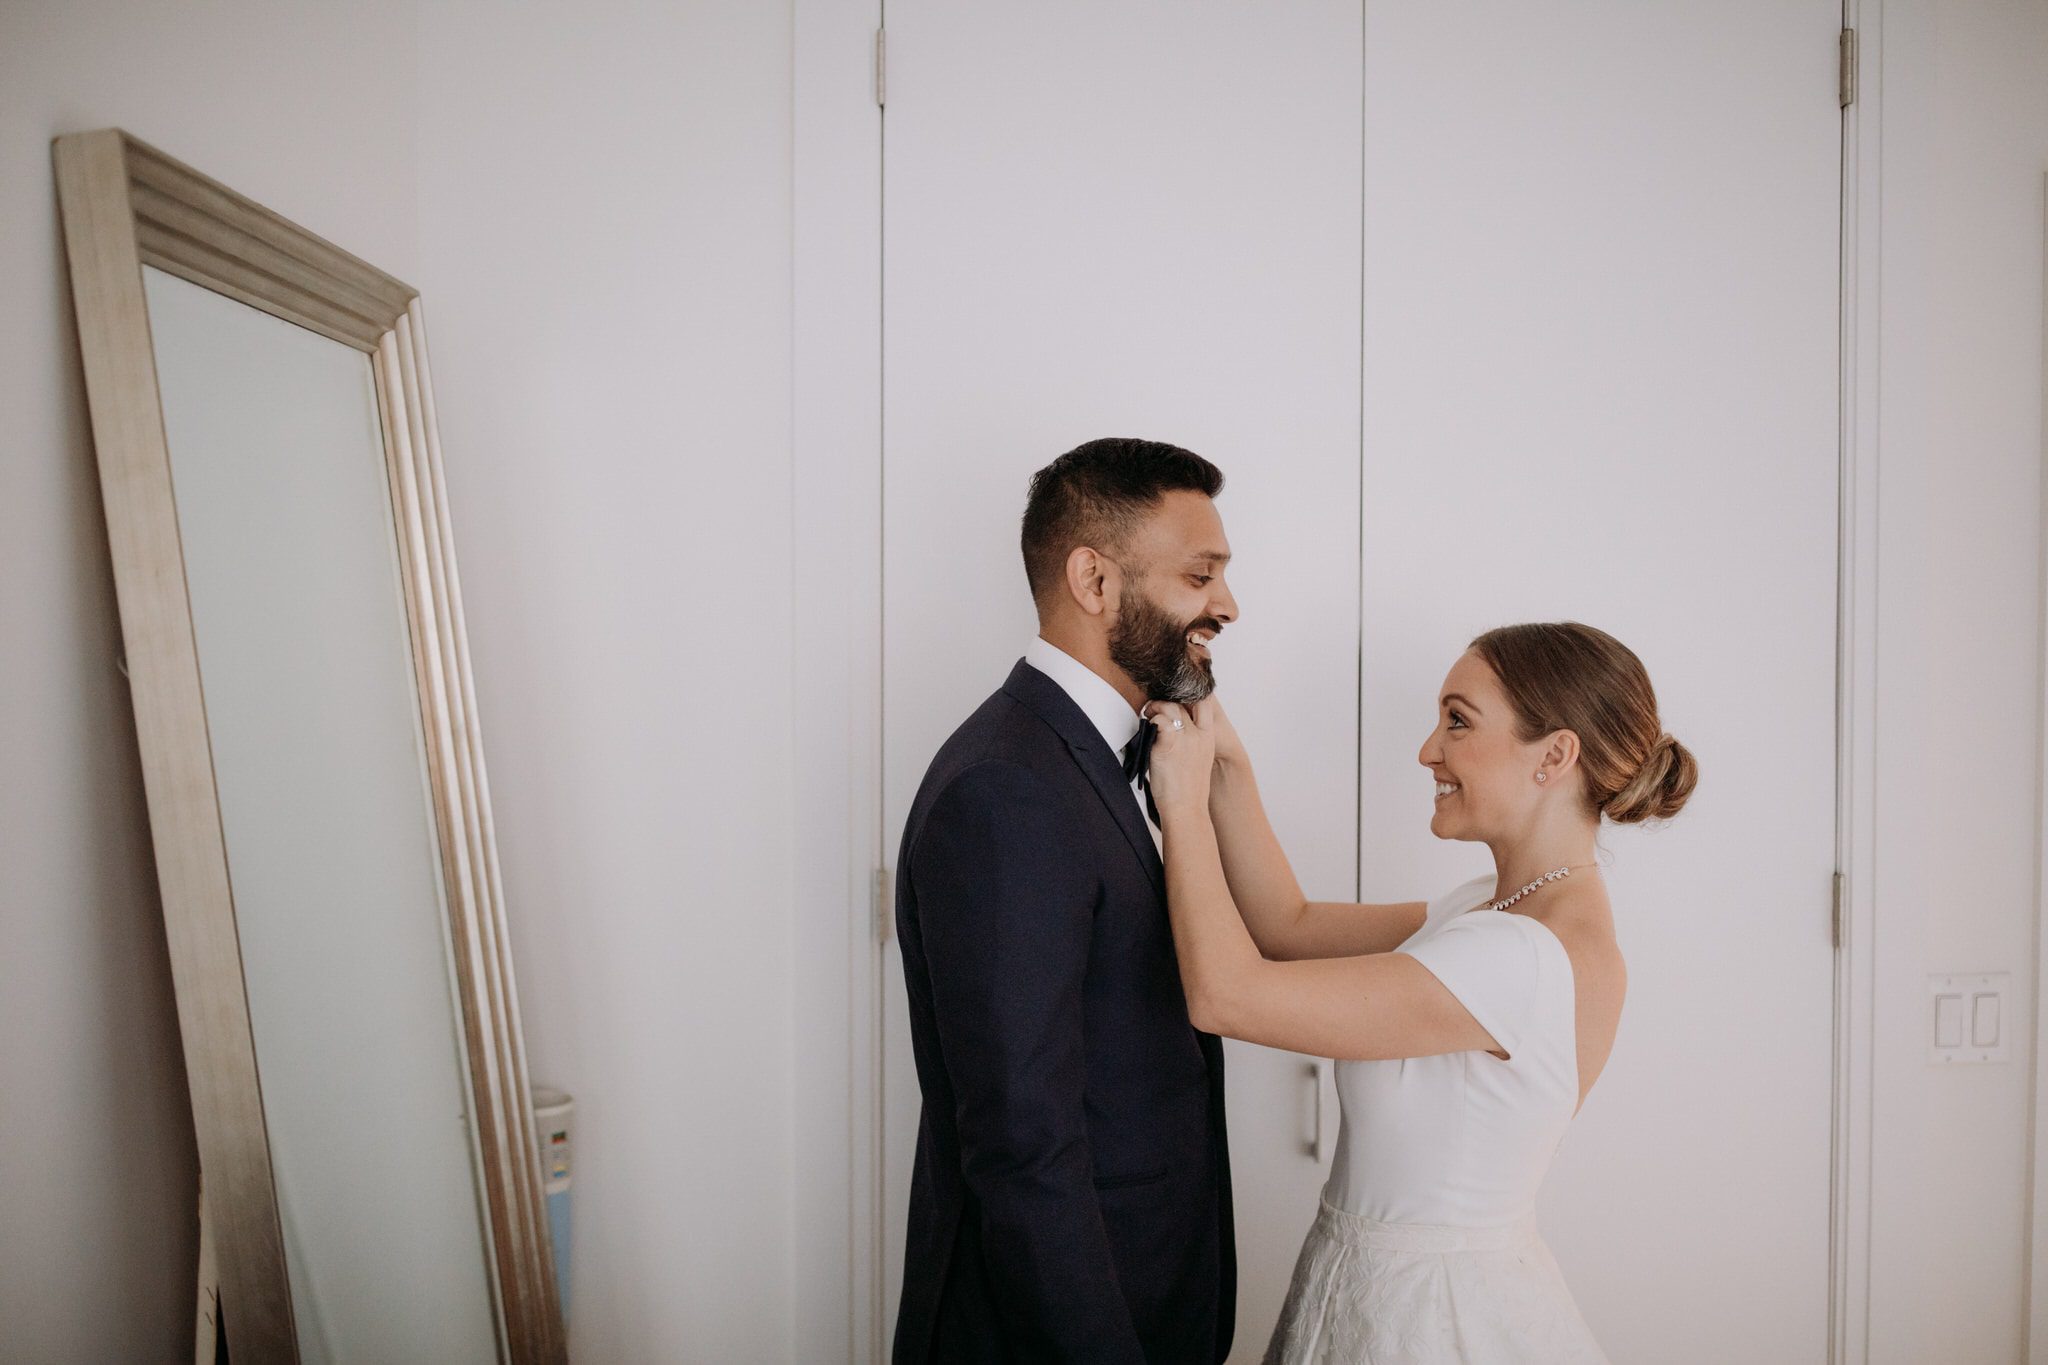 The bride and groom get ready together inside their New York Apartment. Wedding Photographer Brent Calis.